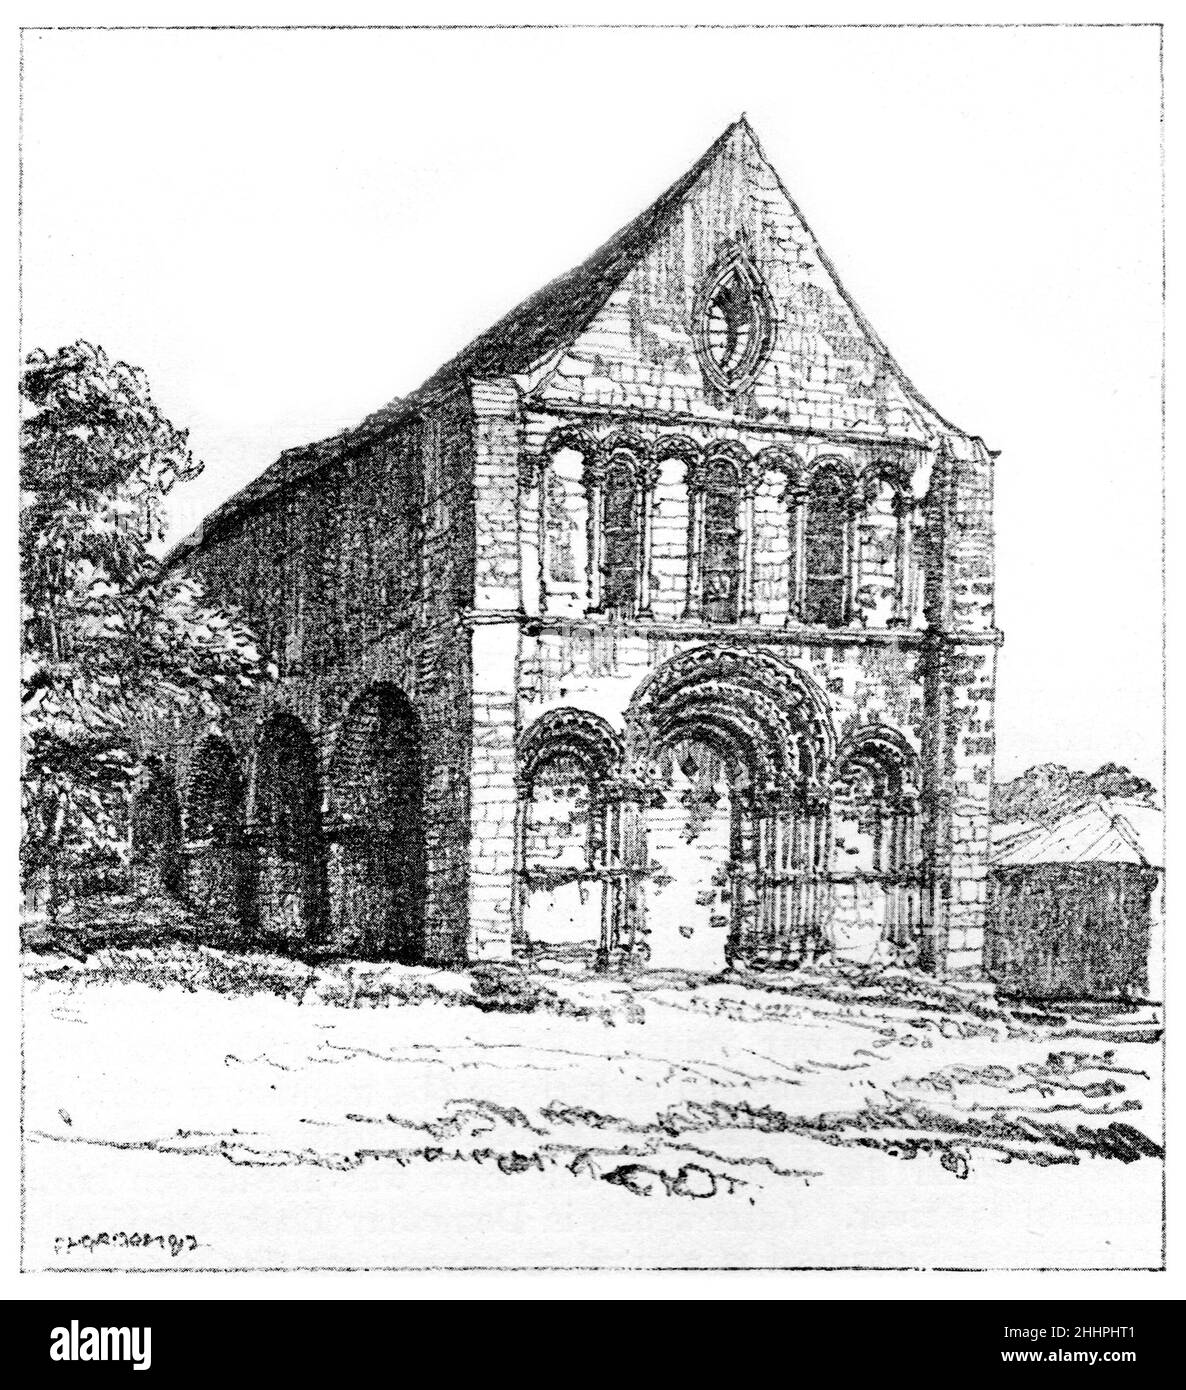 Black and White Illustration; Remains of St Leonard's Priory, Stamford, Lincolnshire; Drawing by Frederick Landseer Maur Griggs; circa 1910 Stock Photo